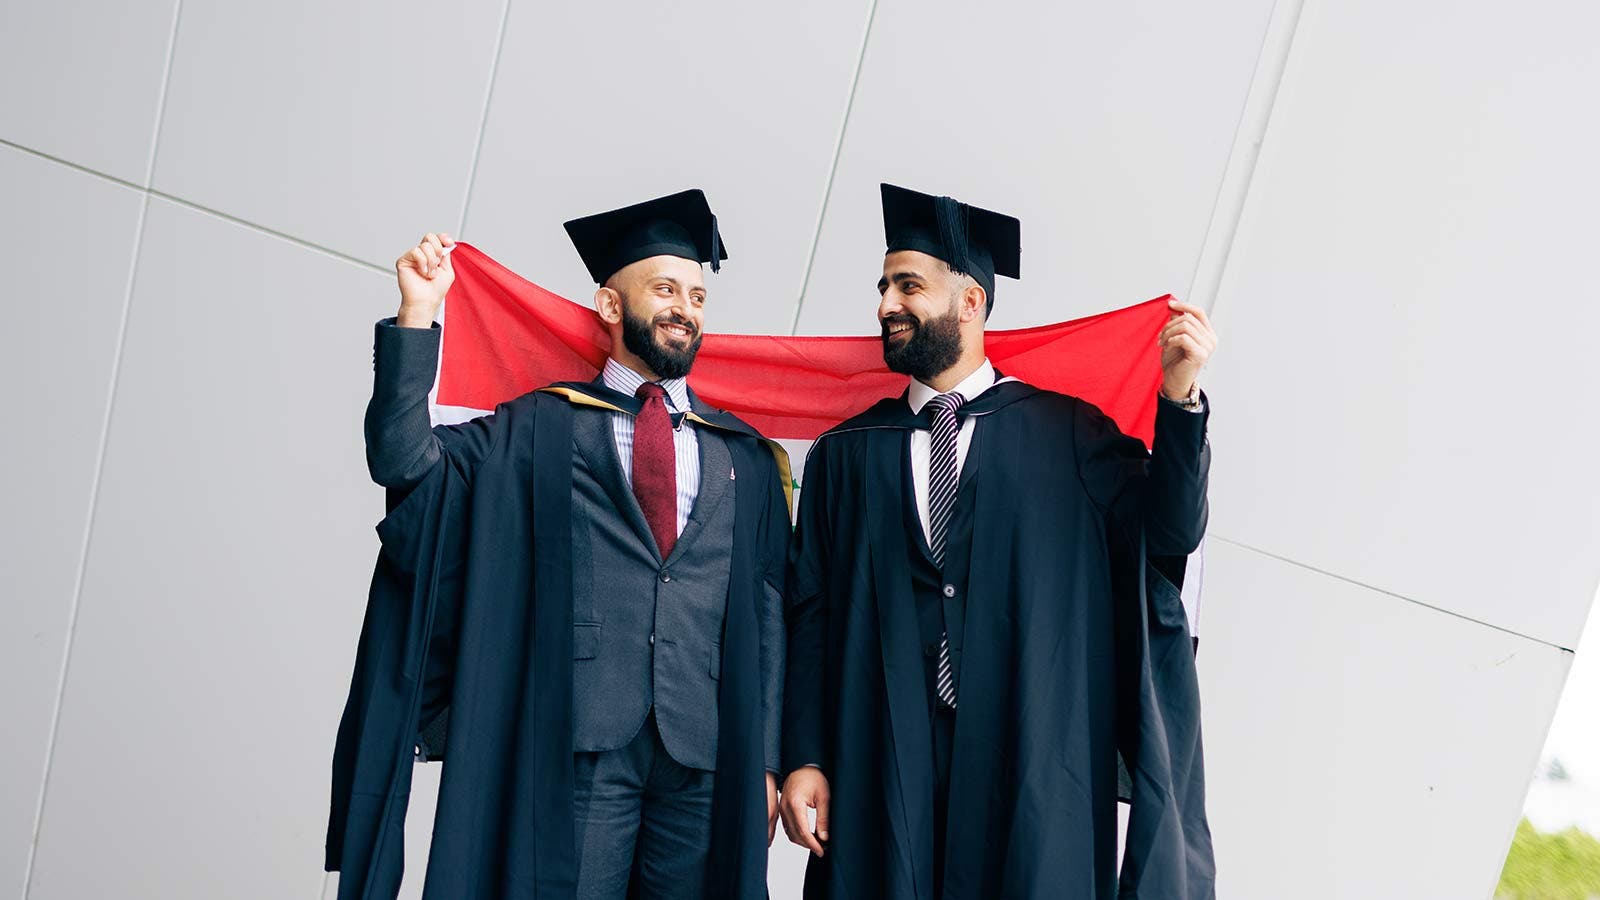 Graduates smiling and holding up a flag